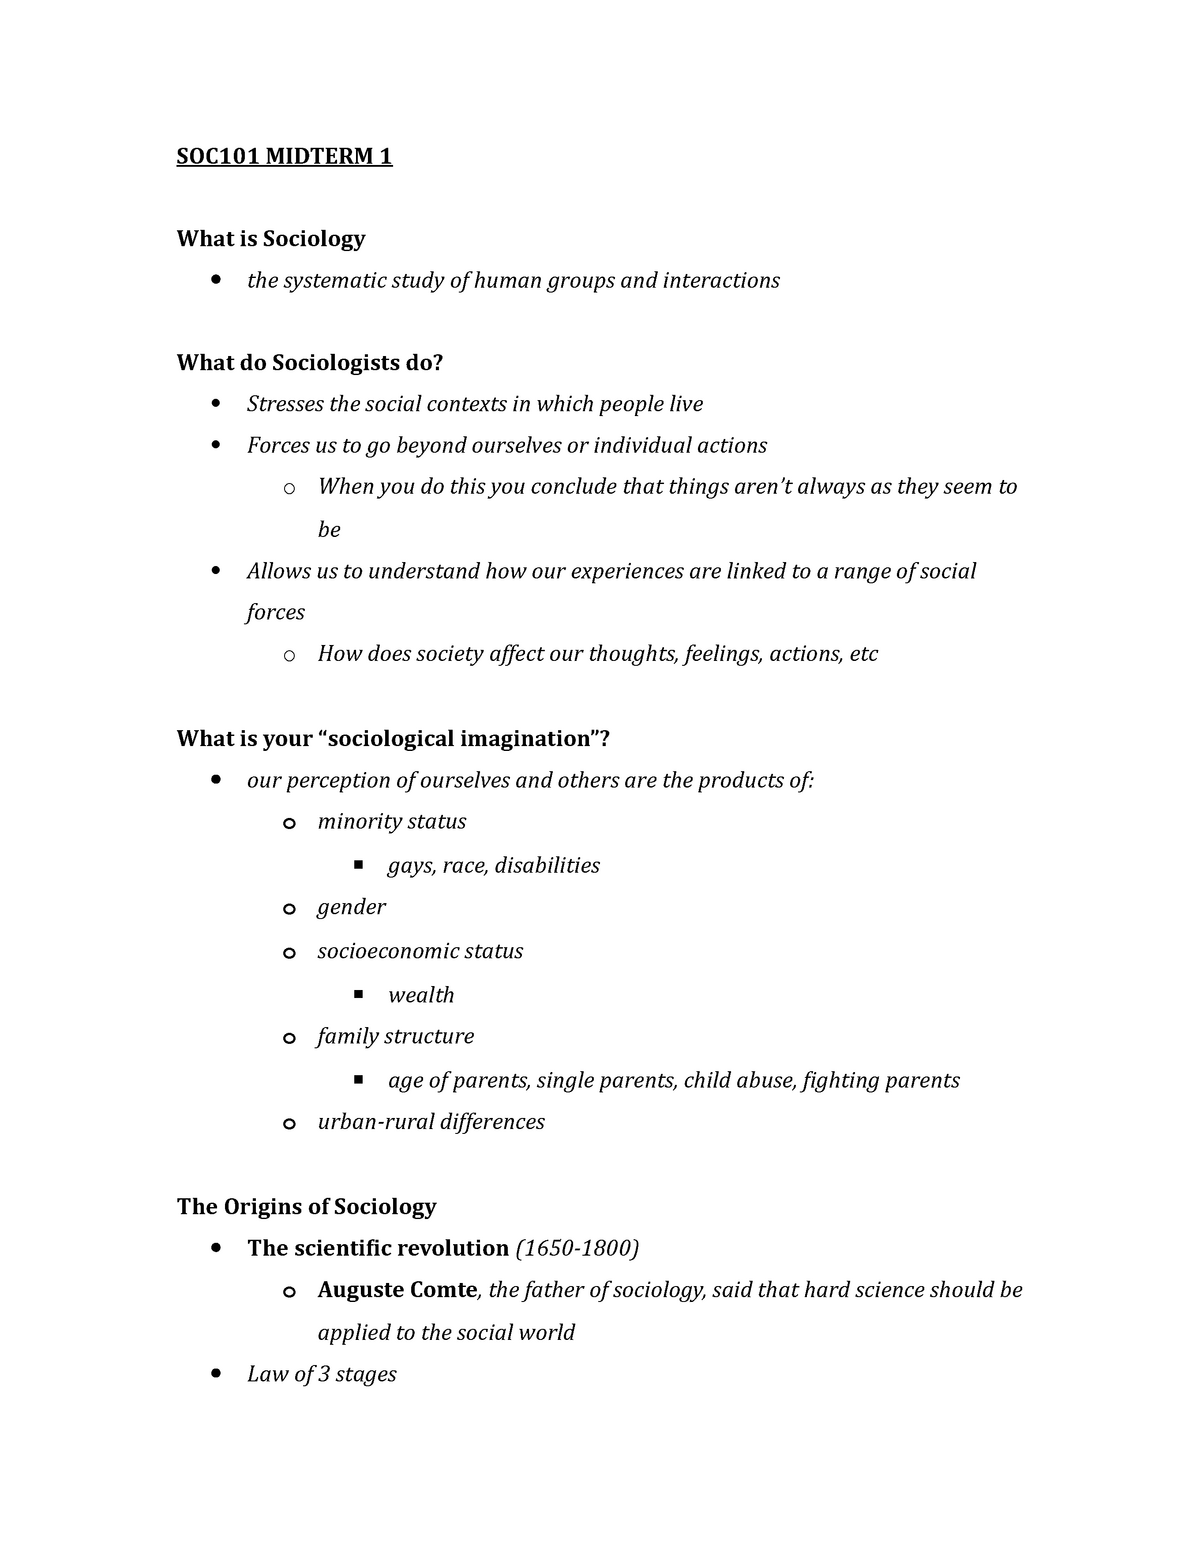 Introduction To Sociology Exam Practice Questions Soc101 Midterm 1 What Is Sociology The